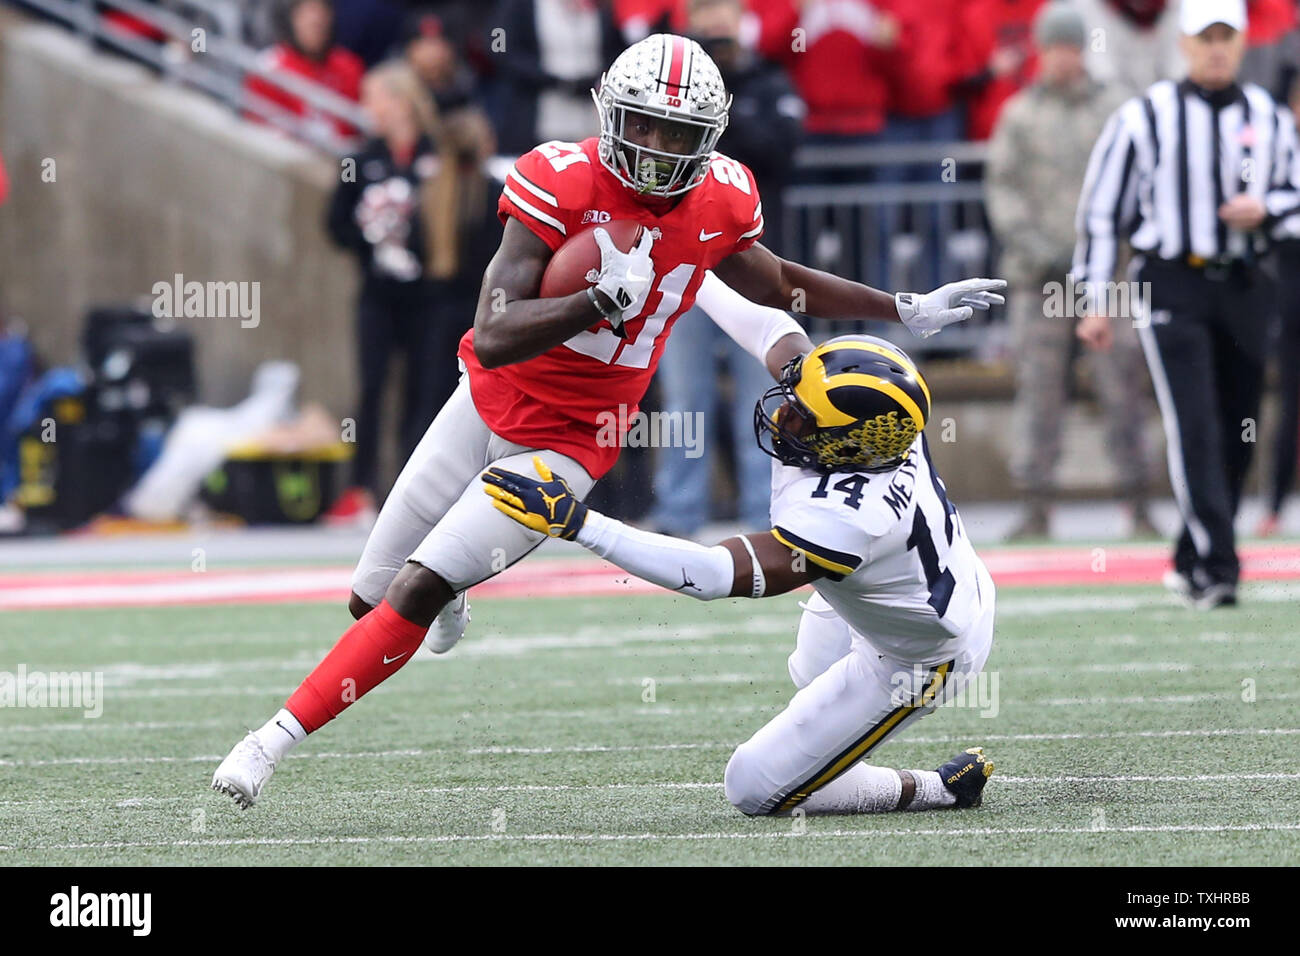 ohio-states-parris-campbell-jr-runs-out-of-the-grasp-of-michigans-josh-metellus-november-24-2018-in-columbus-ohio-photo-by-aaron-josefczykupi-TXHRBB.jpg